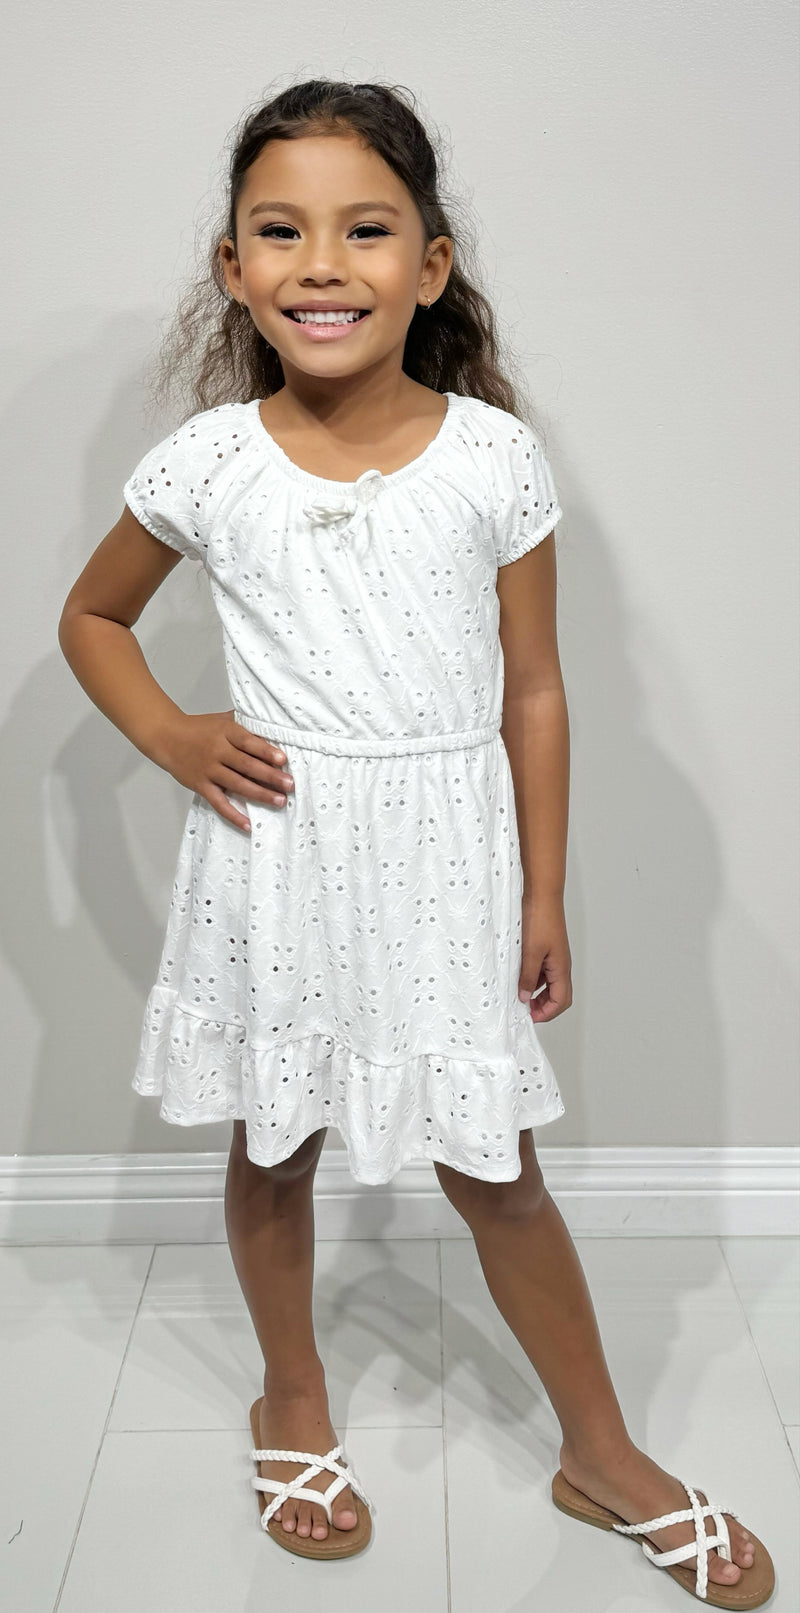 Jeans Warehouse Hawaii - DRESSES 2T-4T - GET IT TOGETHER DRESS | KIDS SIZE 2T-4T | By STAR RIDE KIDS